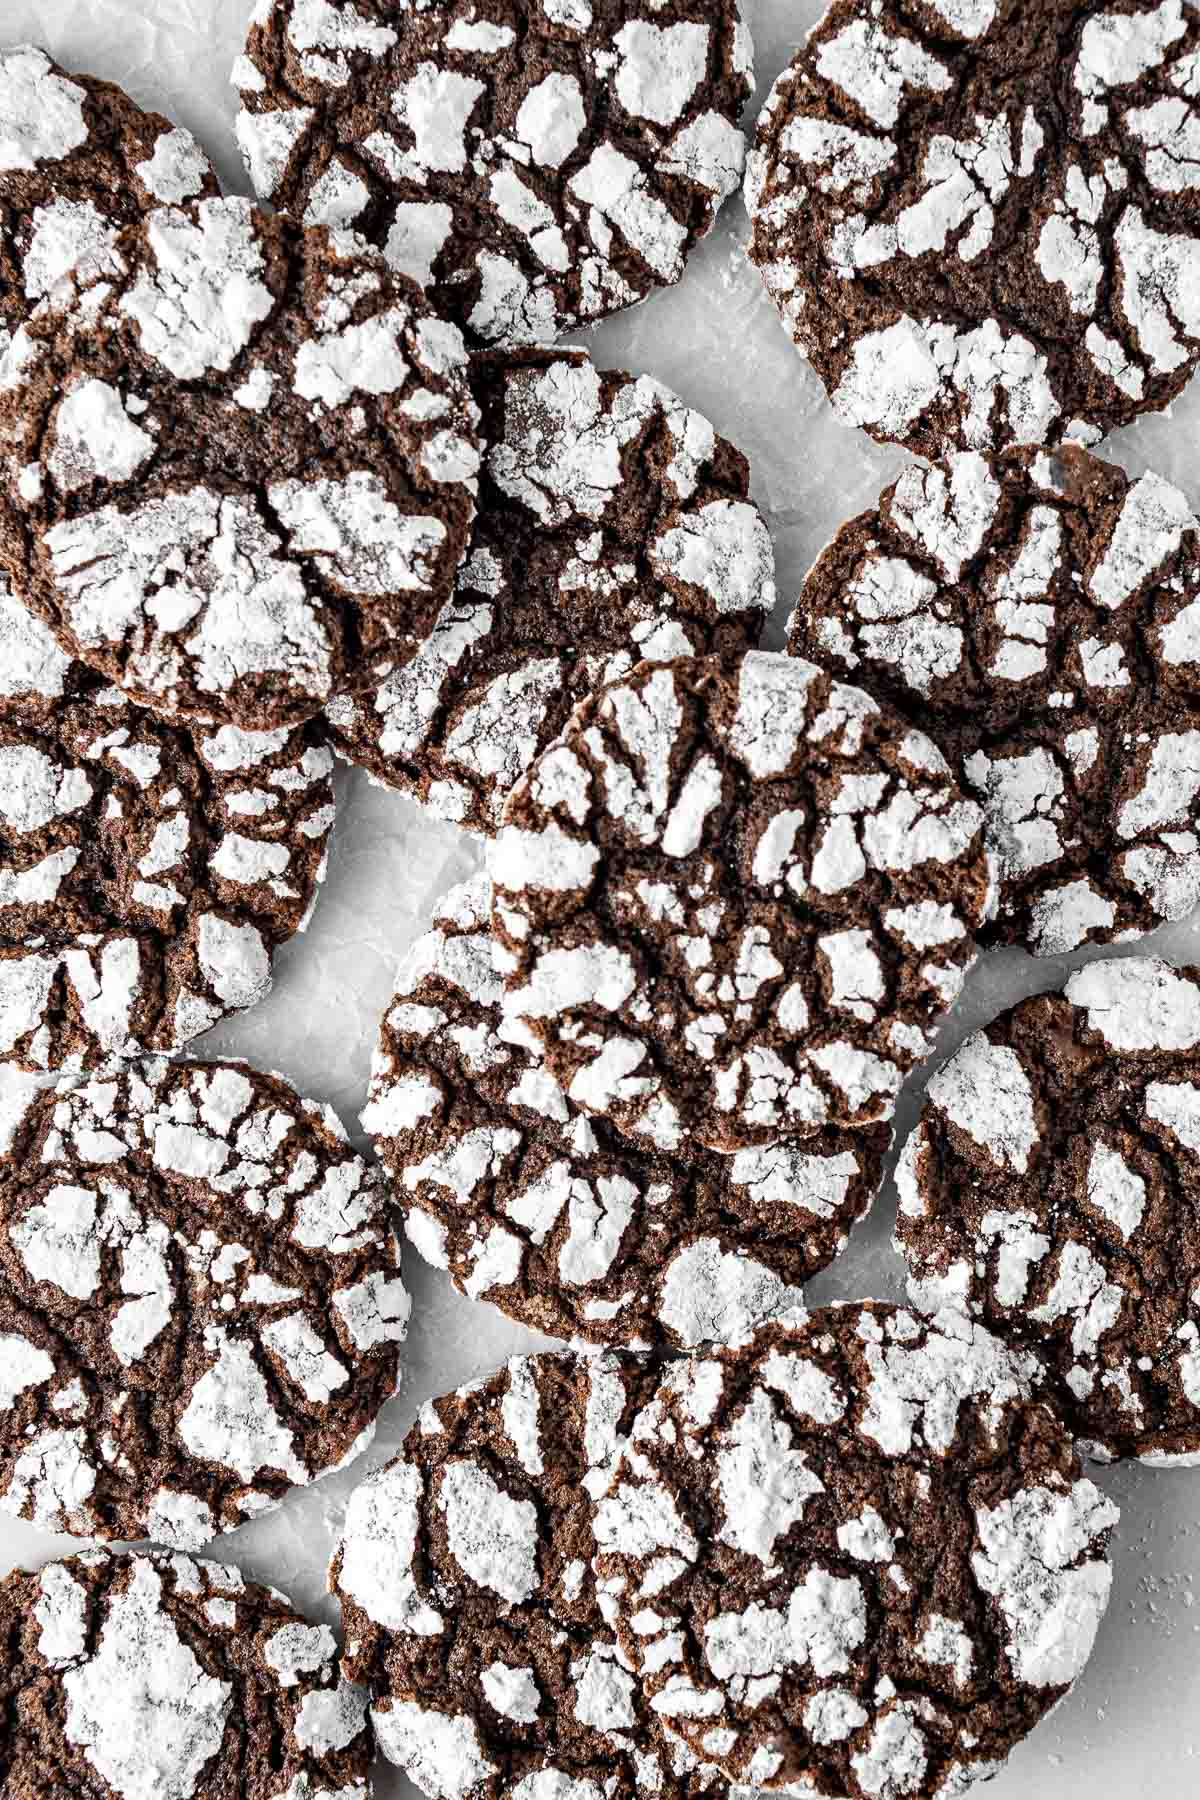 Chocolate crinkle cookies from above showing their pattern.